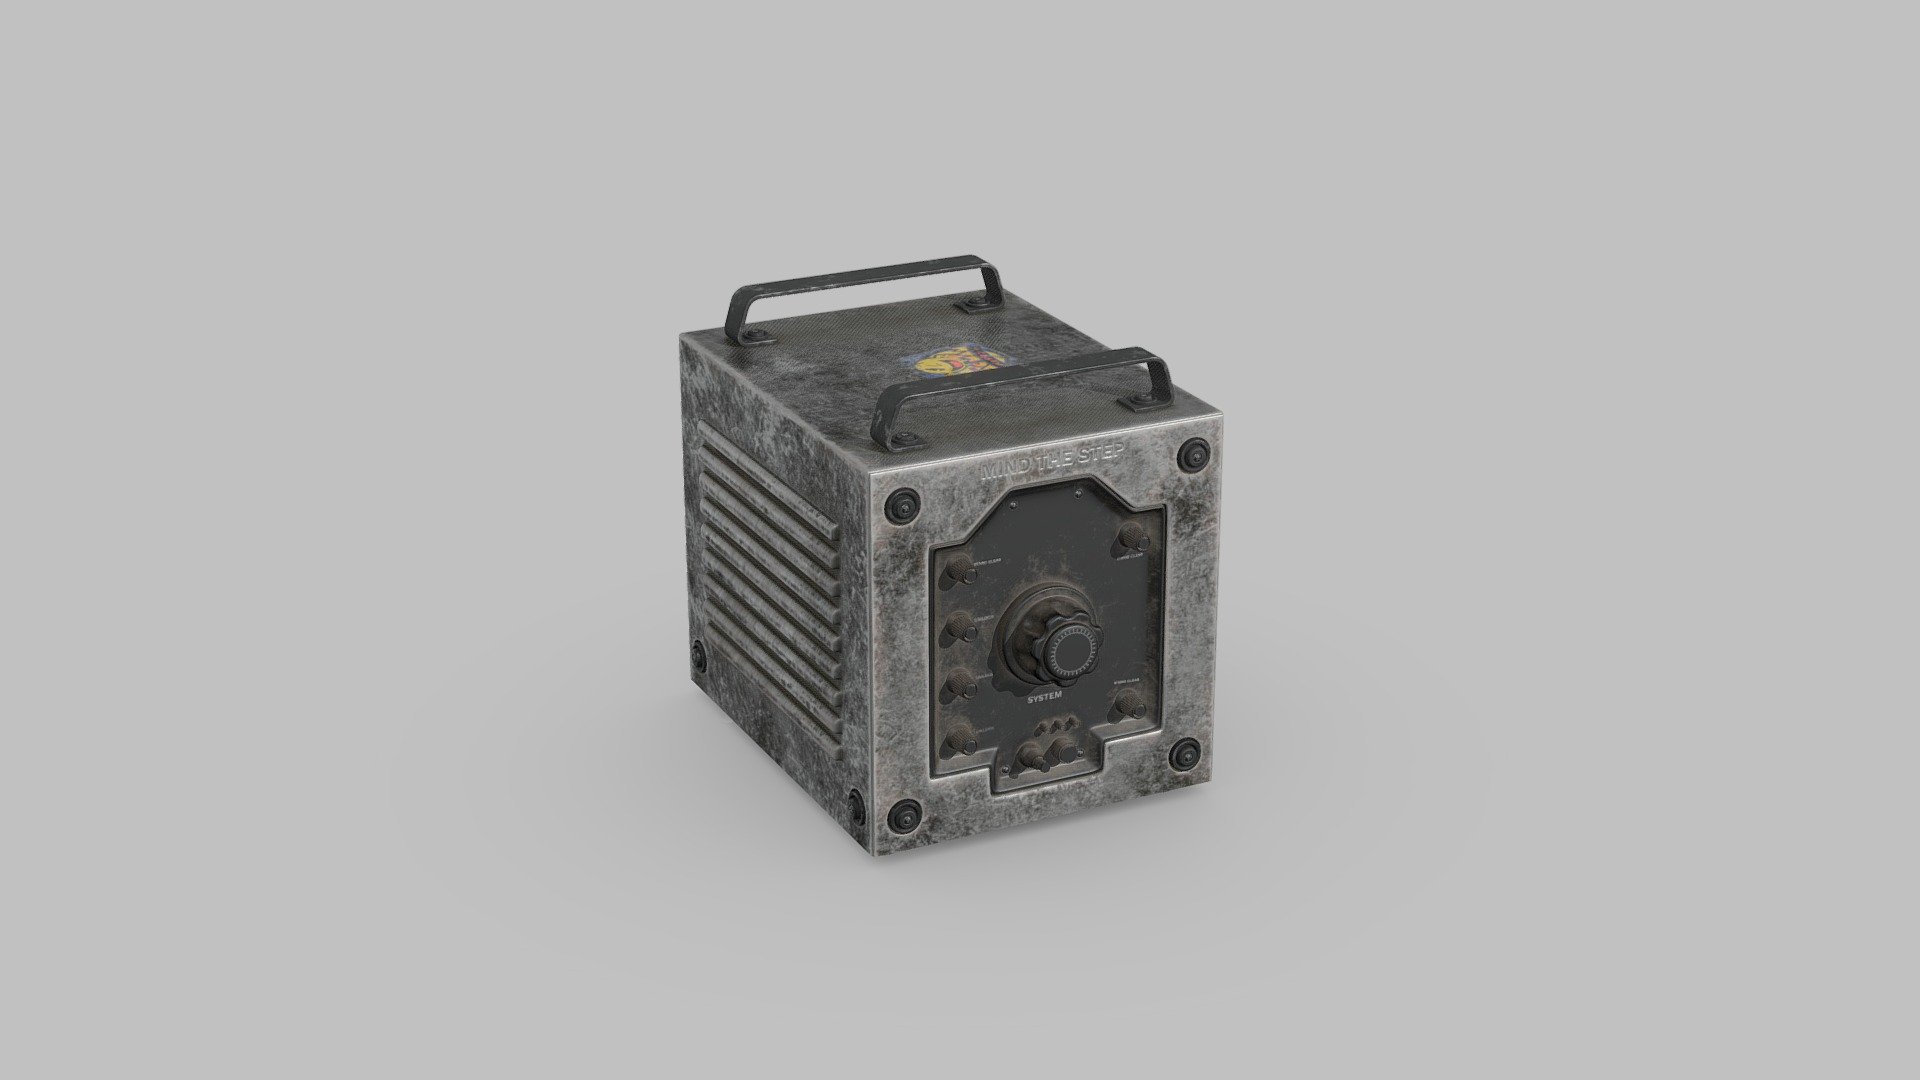 Free download：www.freepoly.org - Military Tuner-Freepoly.org - Download Free 3D model by Freepoly.org (@blackrray) 3d model